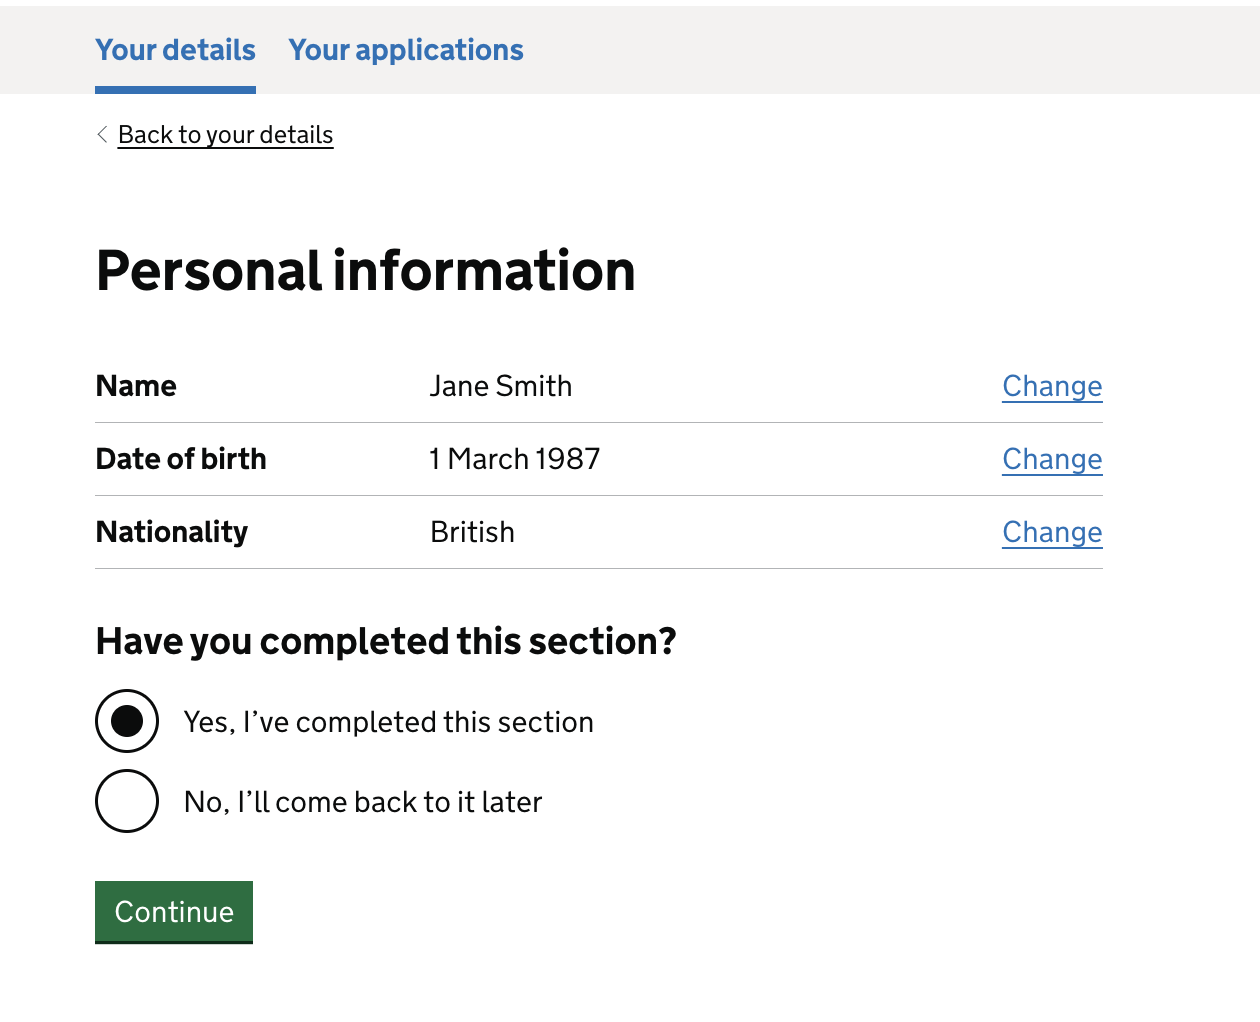 Screenshot of the 'Personal information' summary screen which shows a users Name, Date of birth and Nationality, next to these sections is a change link so the user can edit the information. Below this is a question that says 'Have you completed this section?' with yes or no options for the user to select. Below this is a green button that says 'Continue'.